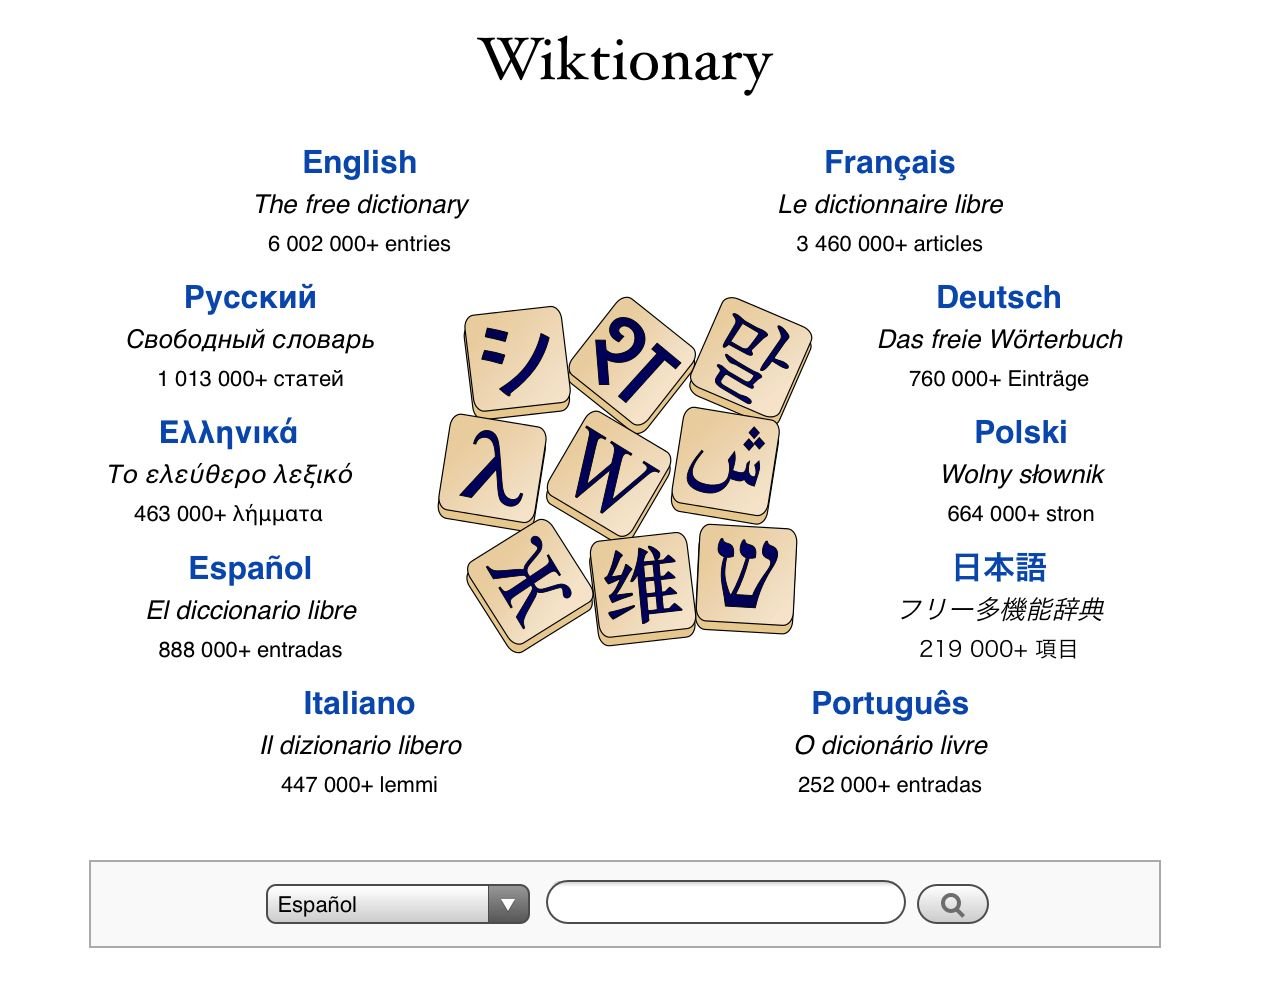 tele - Wiktionary, the free dictionary